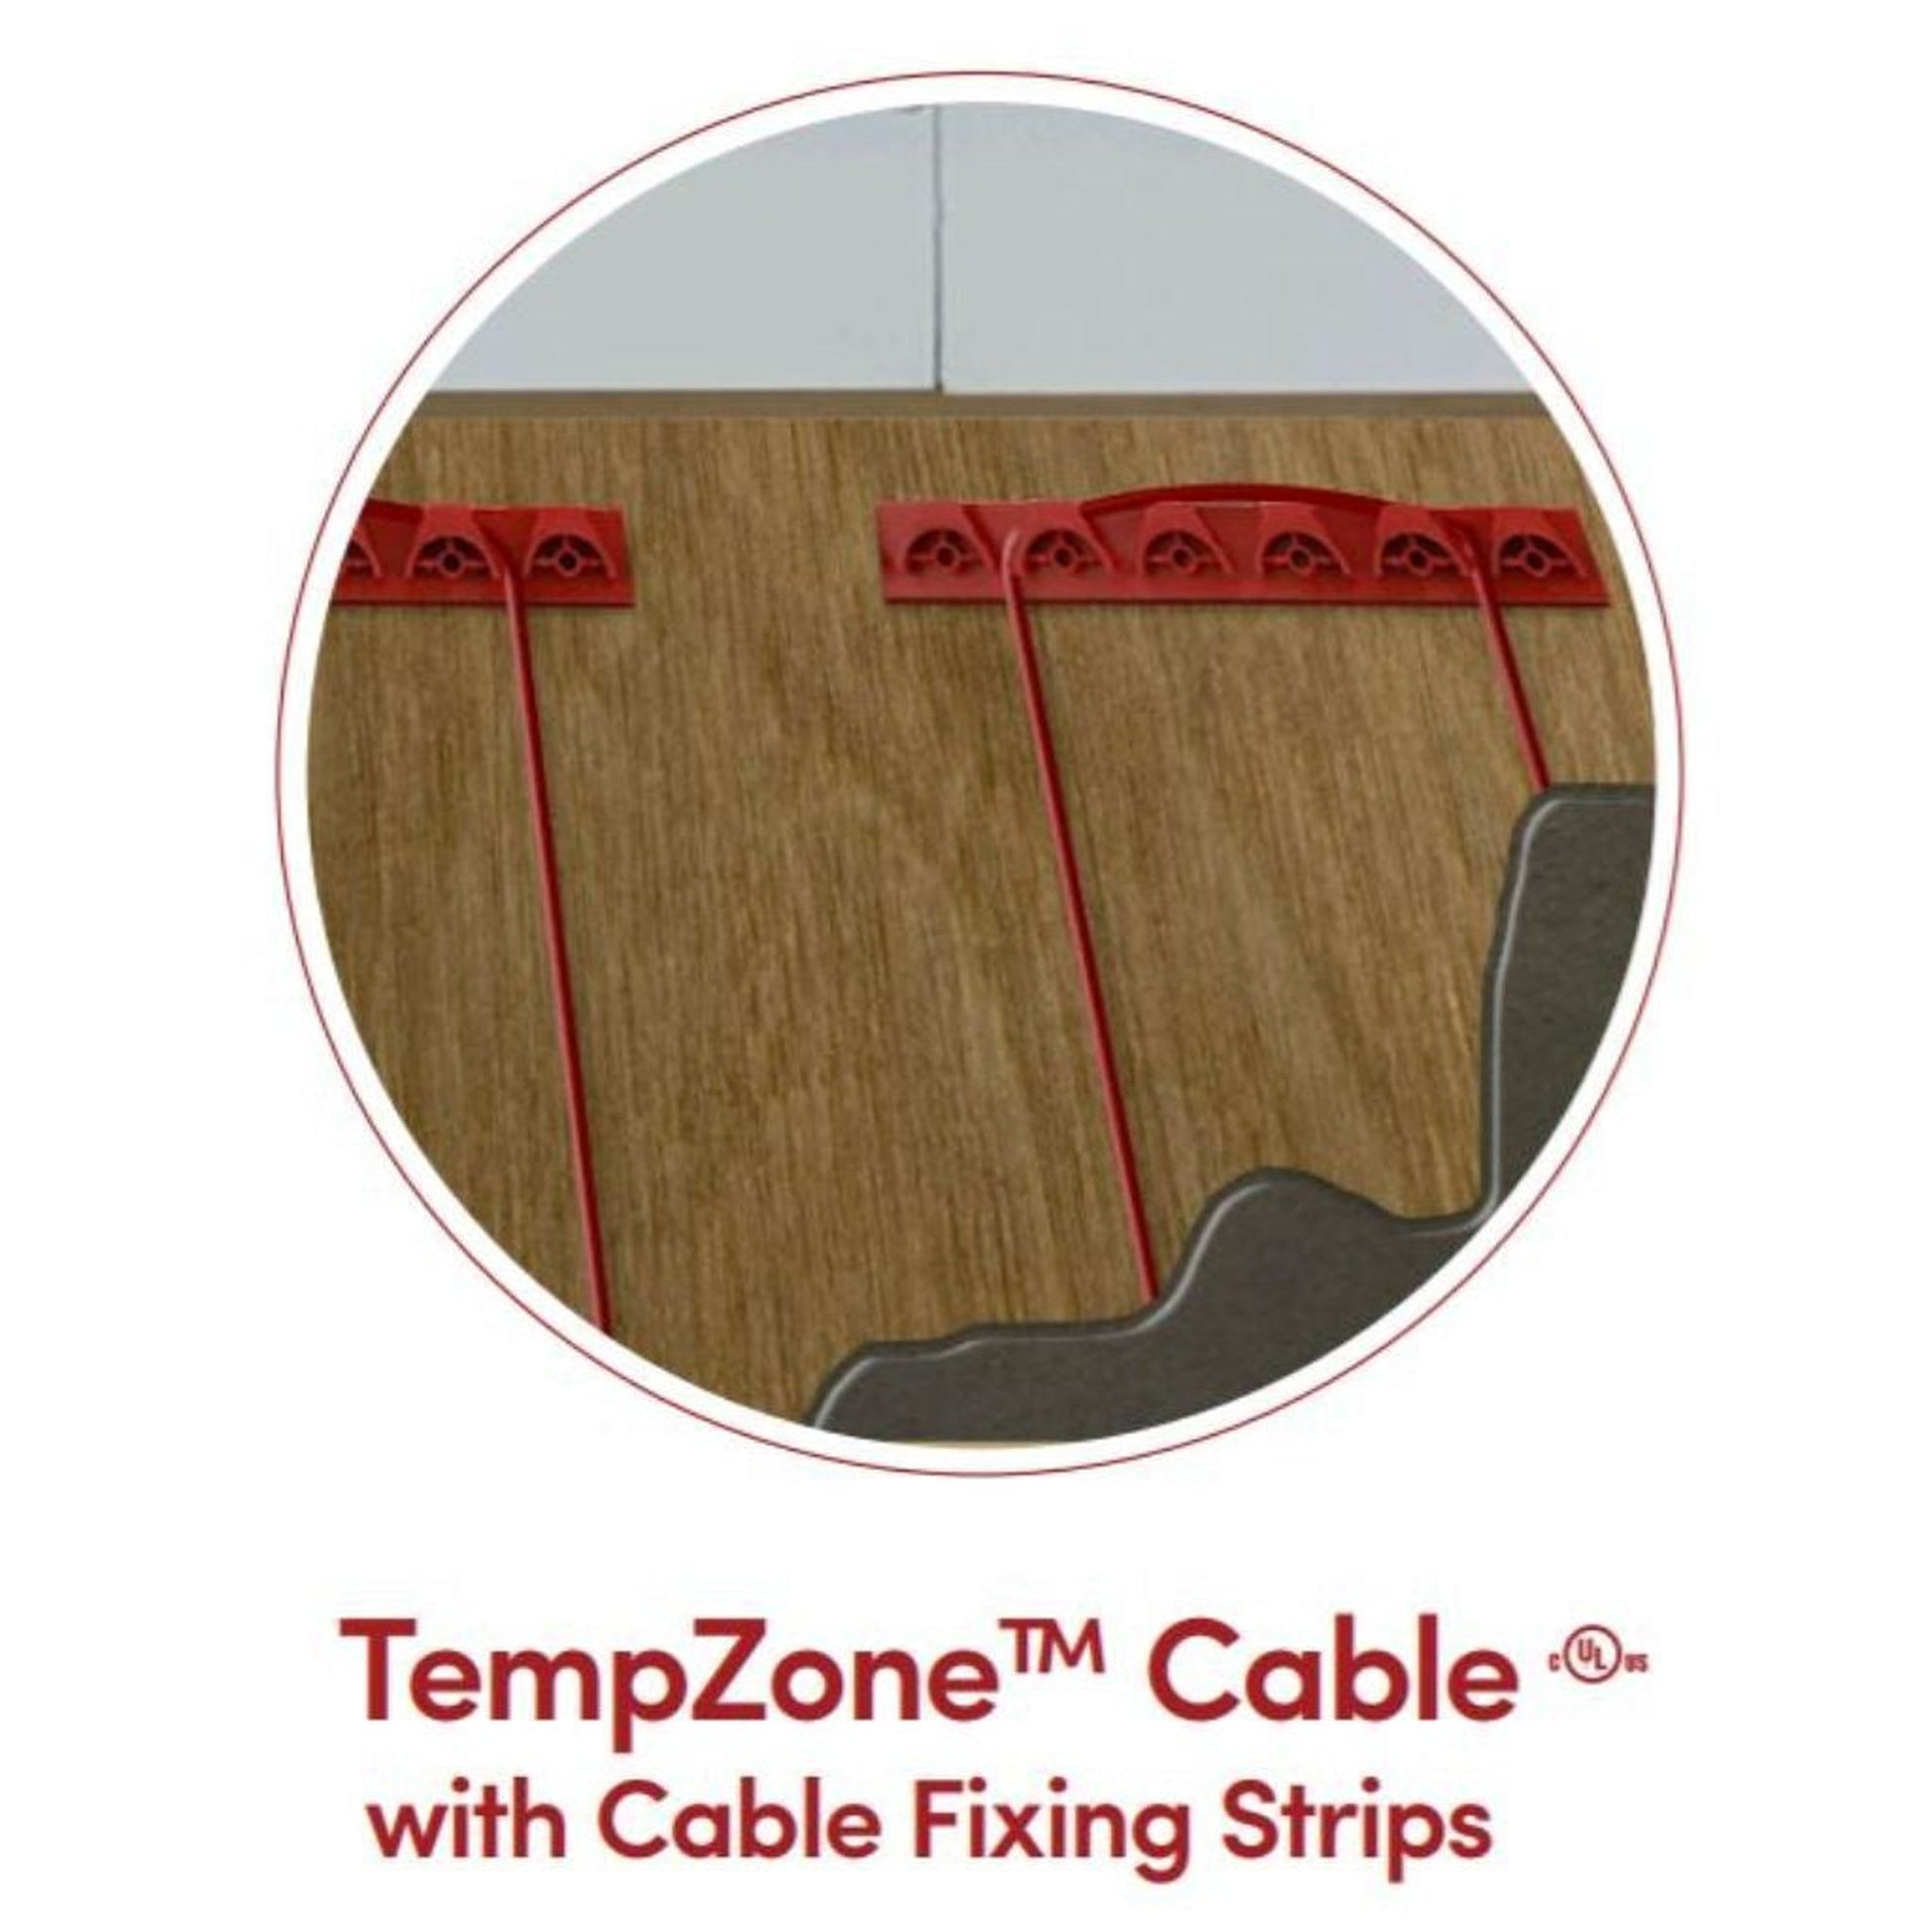 WarmlyYours TempZone Cable 300′ 120V Radiant Floor Heating Cable System Kit With nSpire Touch Programmable Touchscreen Thermostat